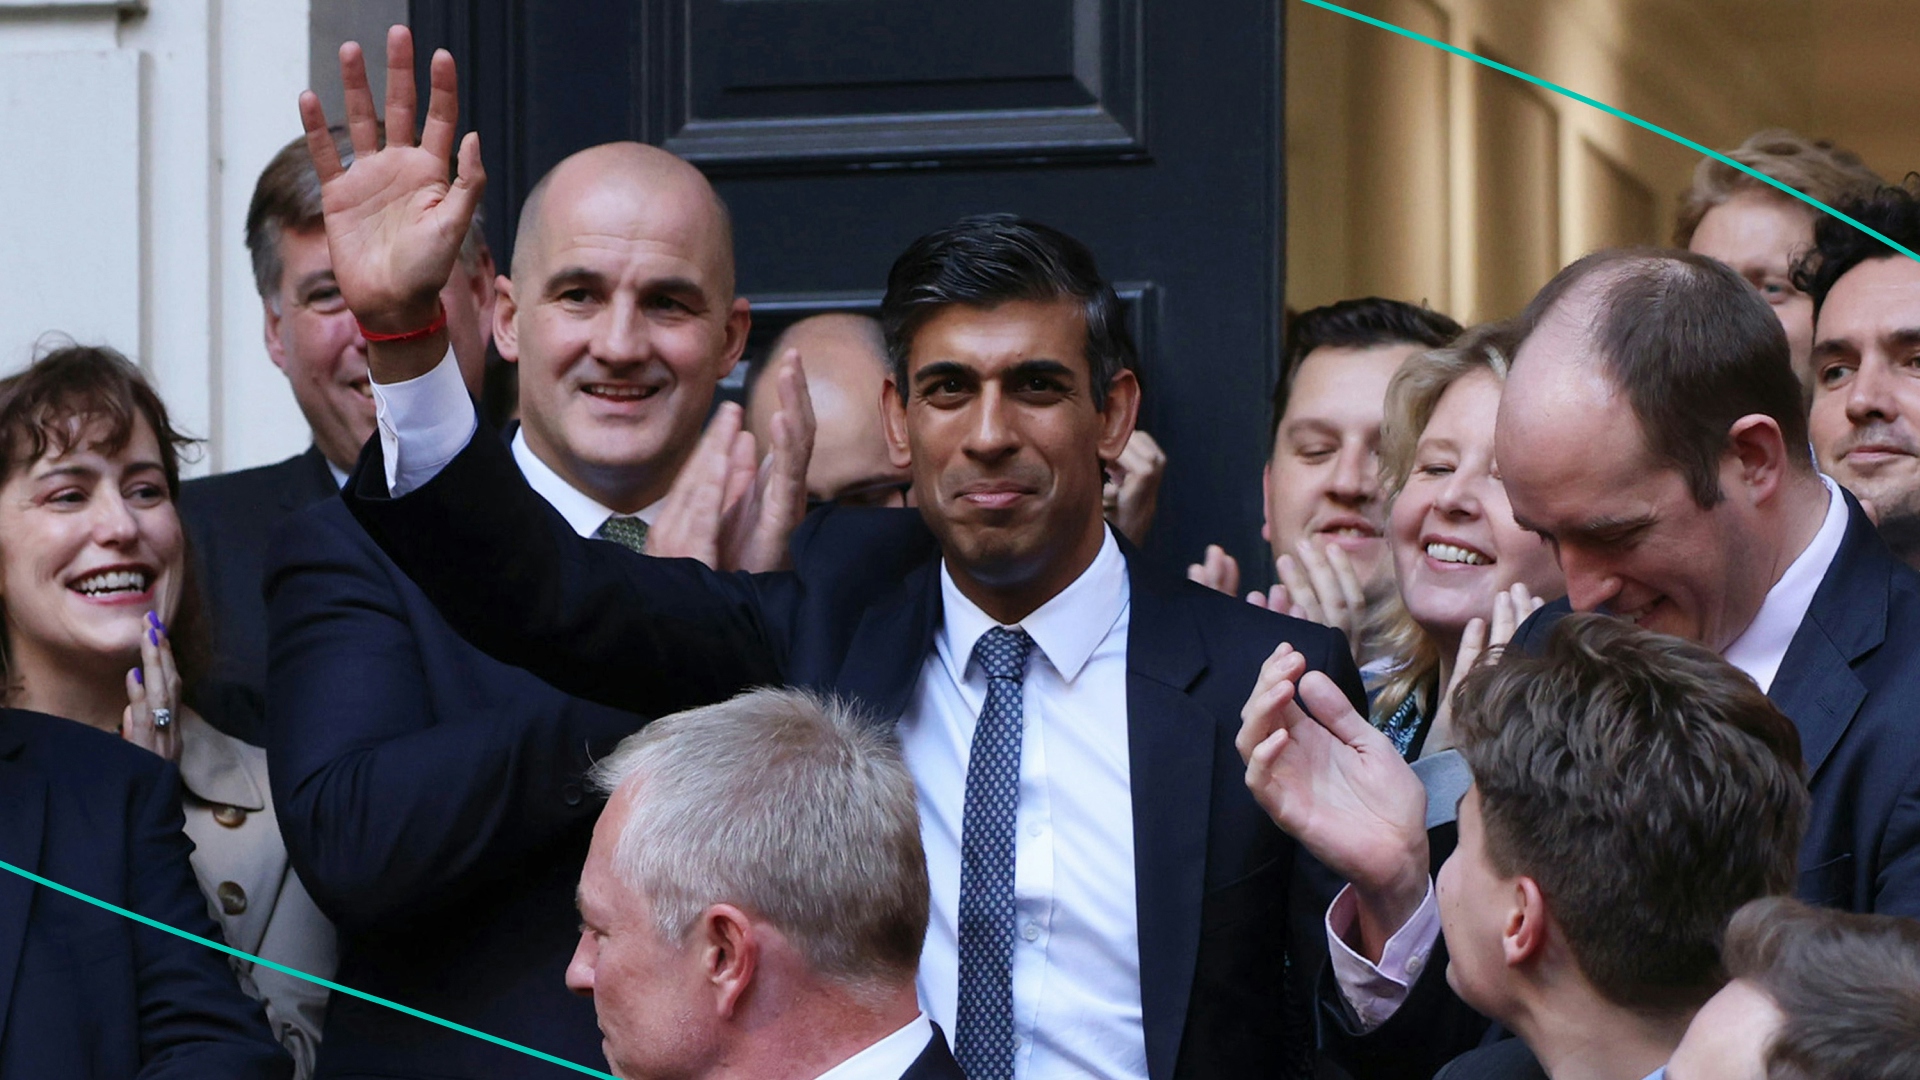 New Conservative Party leader and incoming prime minister Rishi Sunak (C) waves as he is greeted by colleagues at the Conservative Party Headquarters after having been announced as the winner of the Conservative Party leadership contest on October 24, 2022